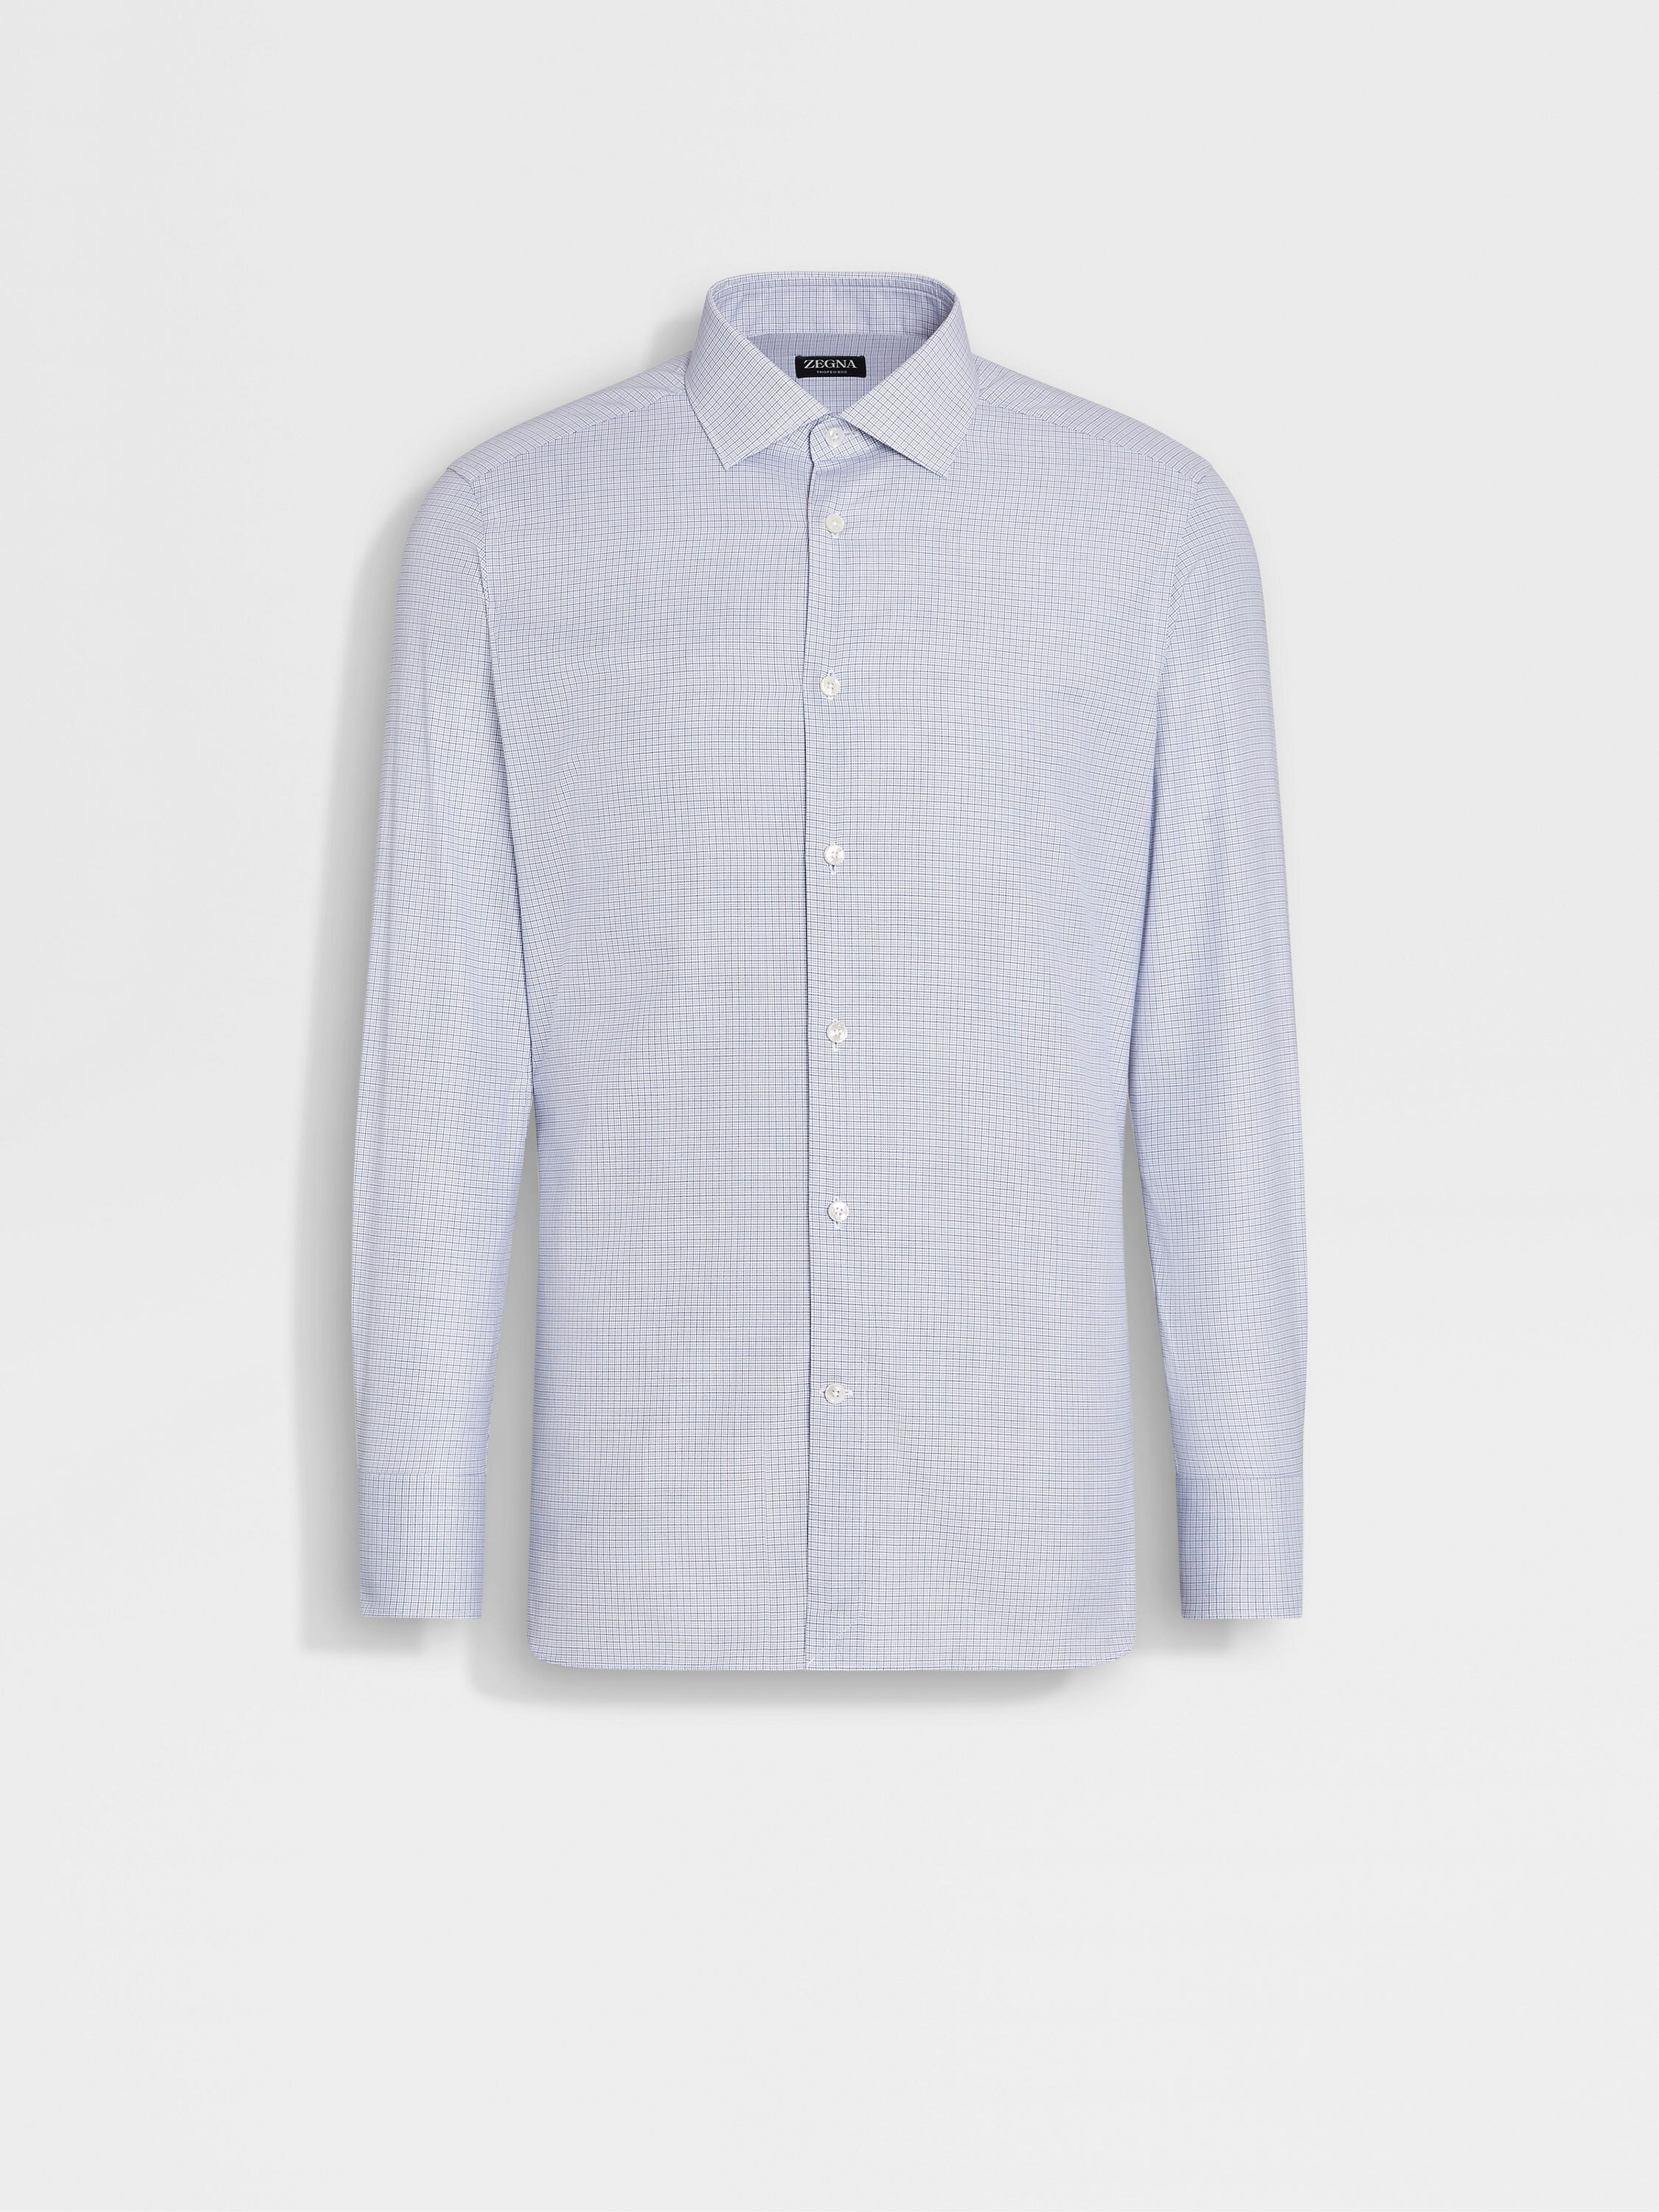 Utility Blue and White Micro-checked Trofeo™ 600 Cotton and Silk Shirt